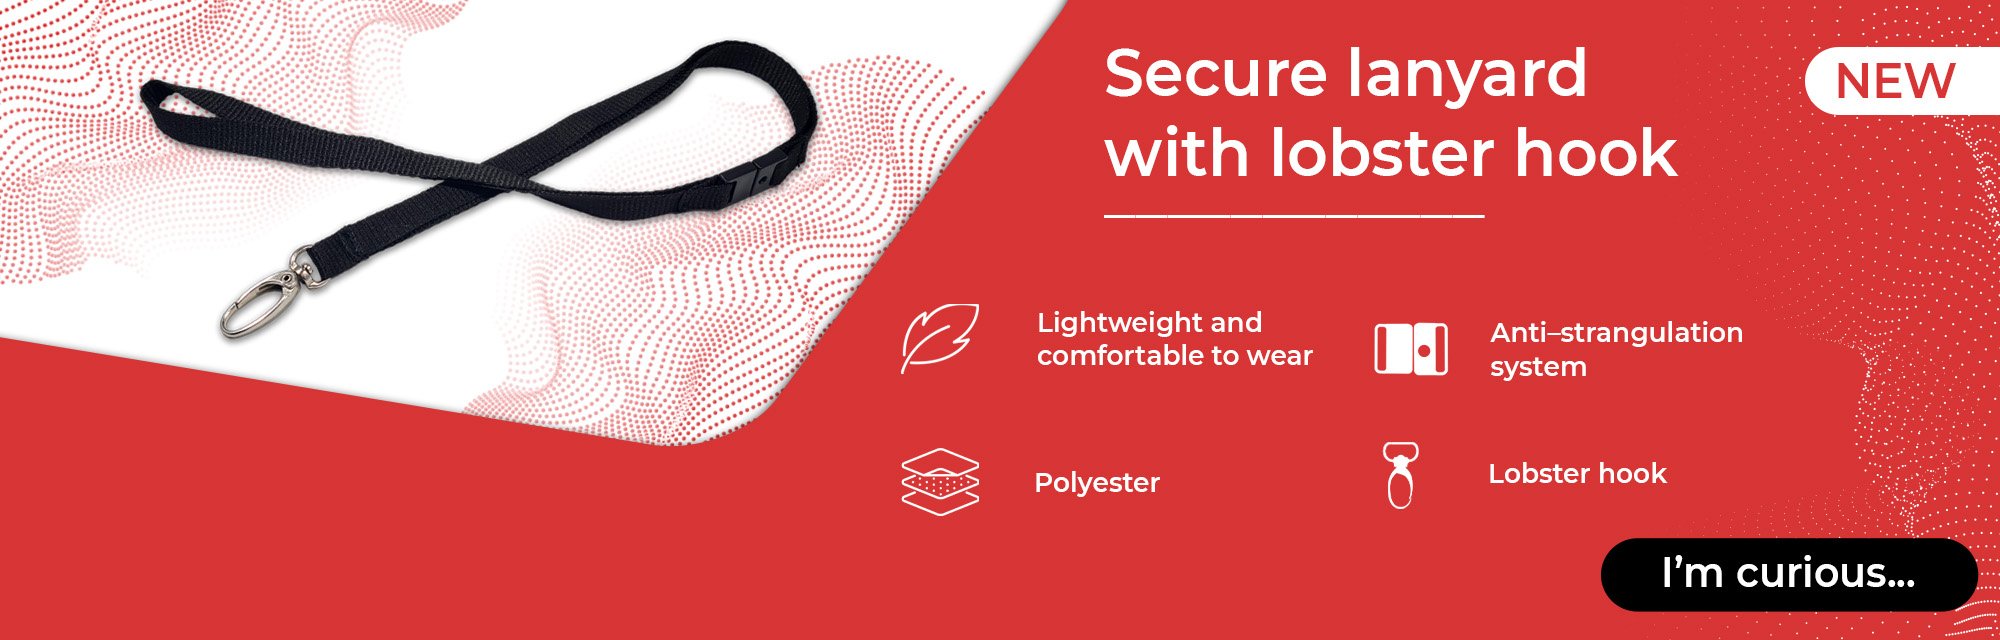 Secure lanyard with lobster hook